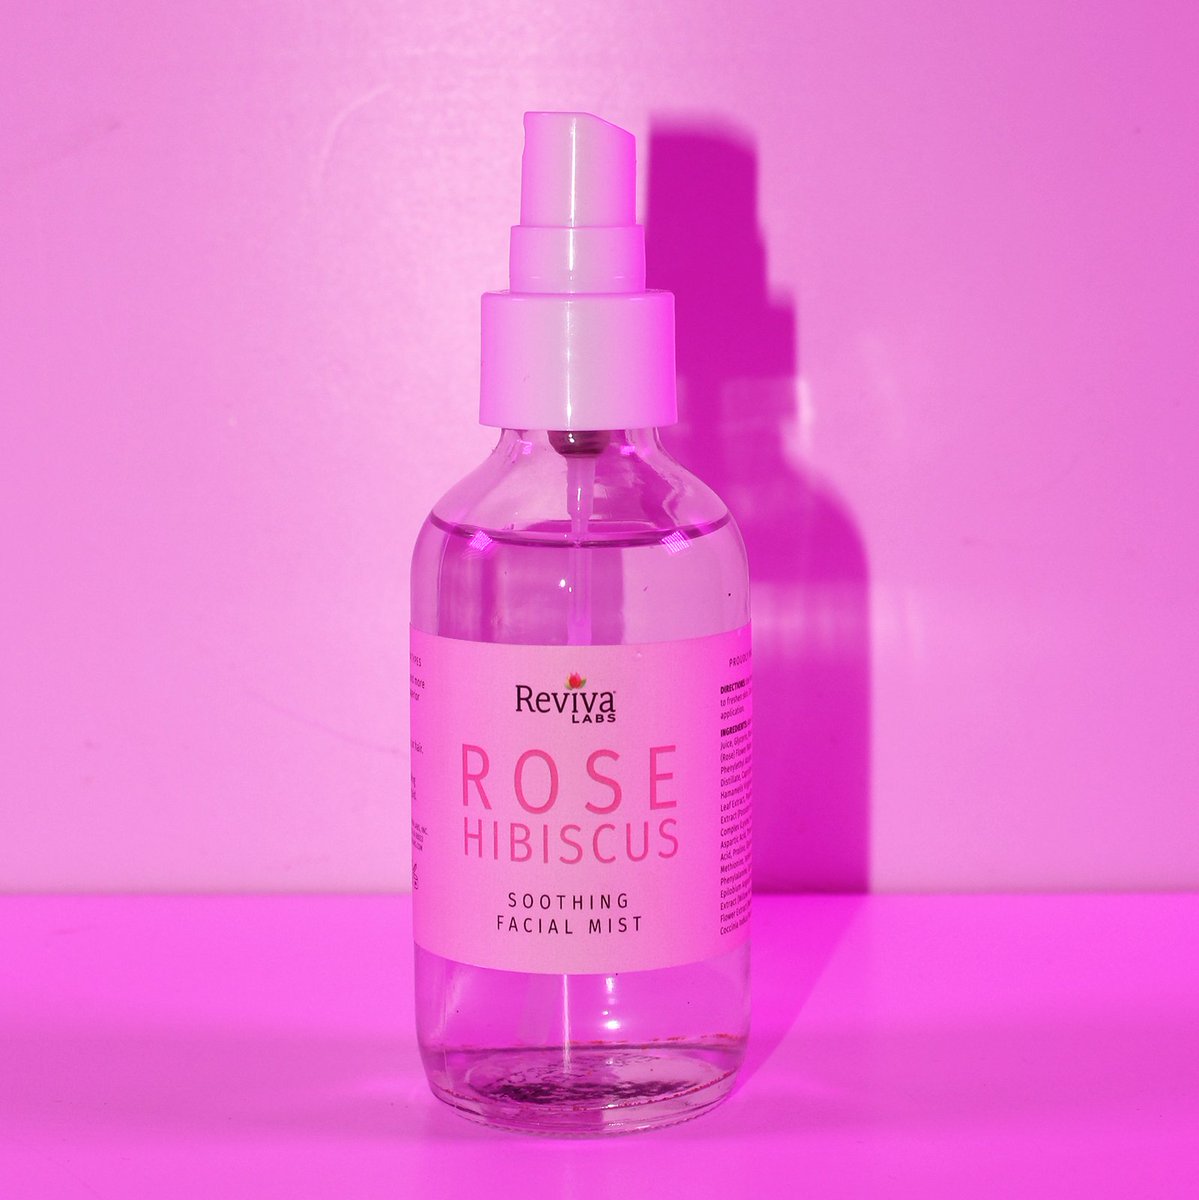 Valentine's Day is approaching, don't forget to get a gift for that special someone! ❤️⏰ #rosehibiscus #facialtoner #glowingskin #skincareoftheday